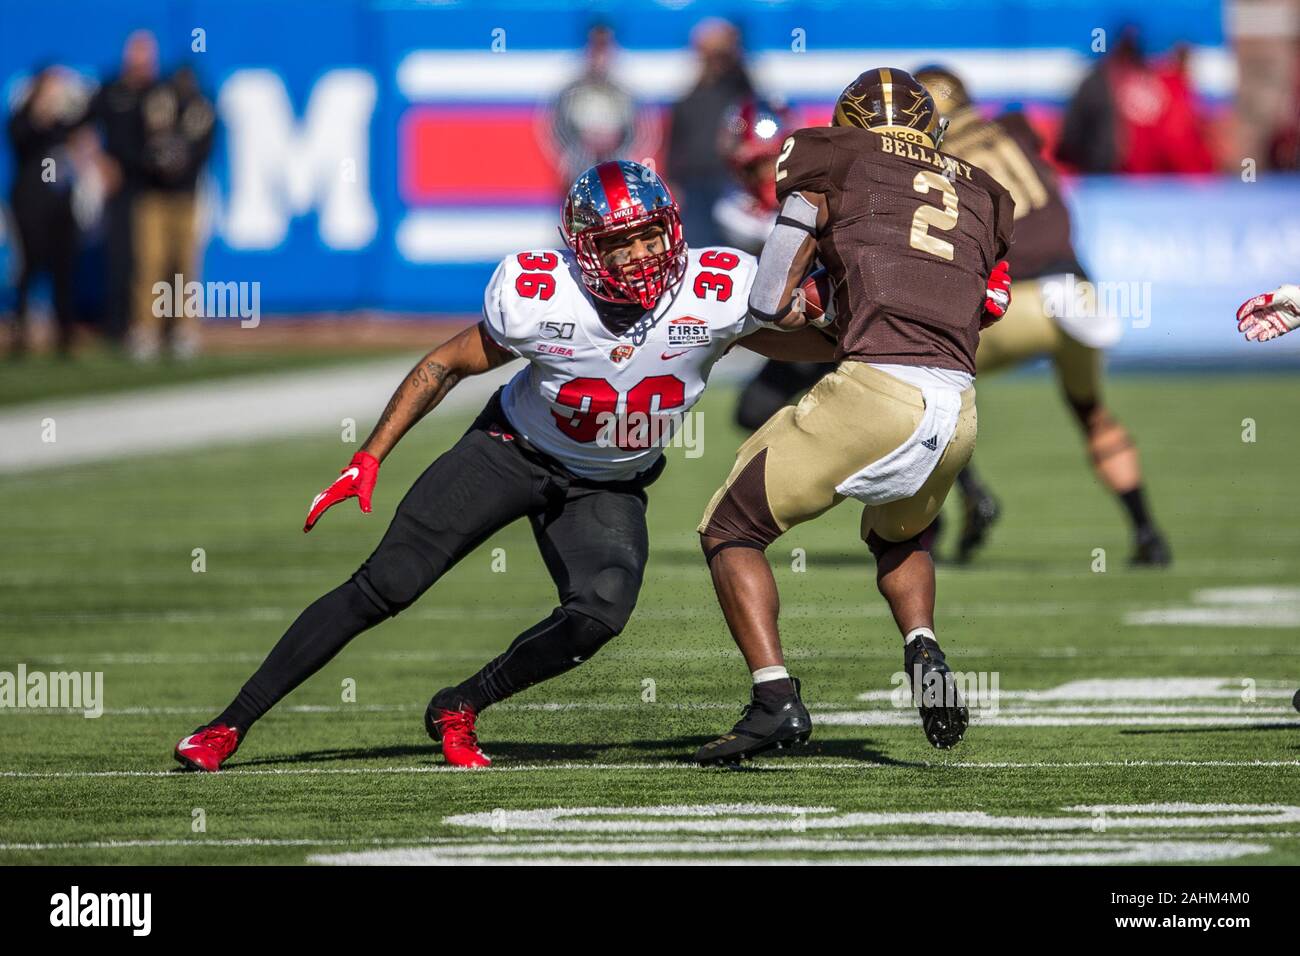 Dallas, Texas, USA. 30th Dec, 2019. Western Kentucky Hilltoppers linebacker Kyle Bailey (36) in action during the Servpro First Responder Bowl game between Western Michigan Broncos and the Western Kentucky Hilltoppers at the gerald Ford Stadiuml Stadium in Dallas, Texas. Credit: Dan Wozniak/ZUMA Wire/Alamy Live News Stock Photo